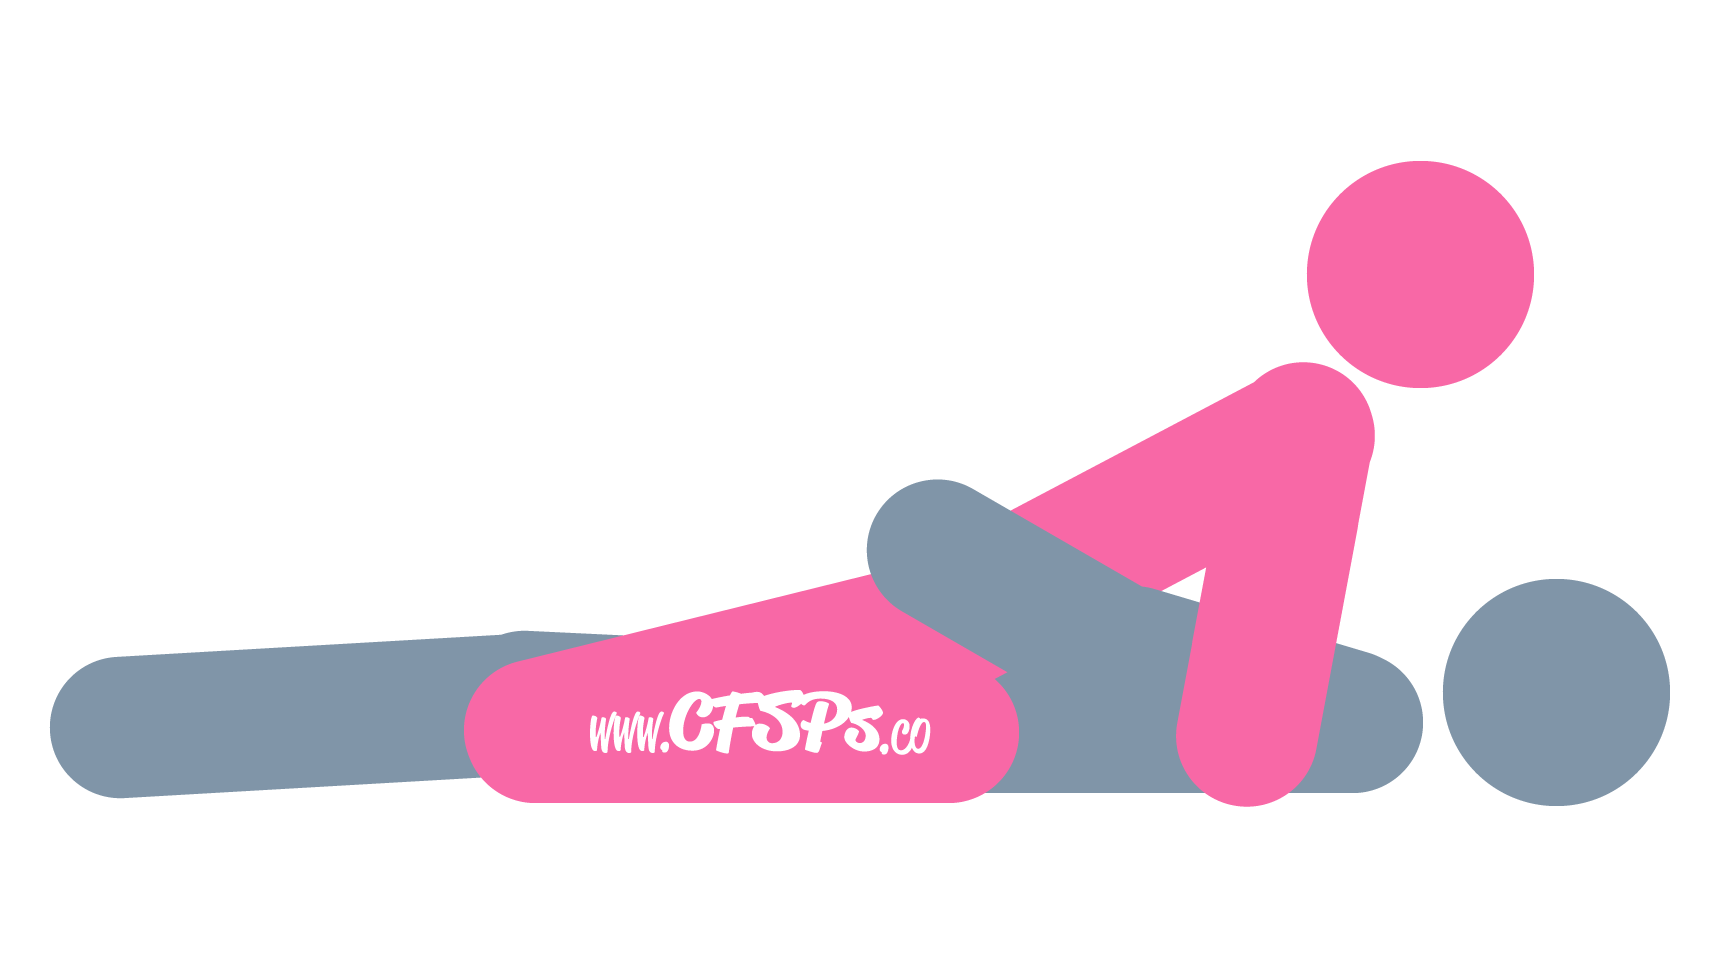 This stick figure image depicts a man and woman having sex in the Laid-Back Reverse Cowgirl sex position. The man is lying on his back with his legs together. The woman is straddling him with her knees near his. She's sitting back on his pelvis, leaning back and supporting her upper body with her arms near his shoulders.